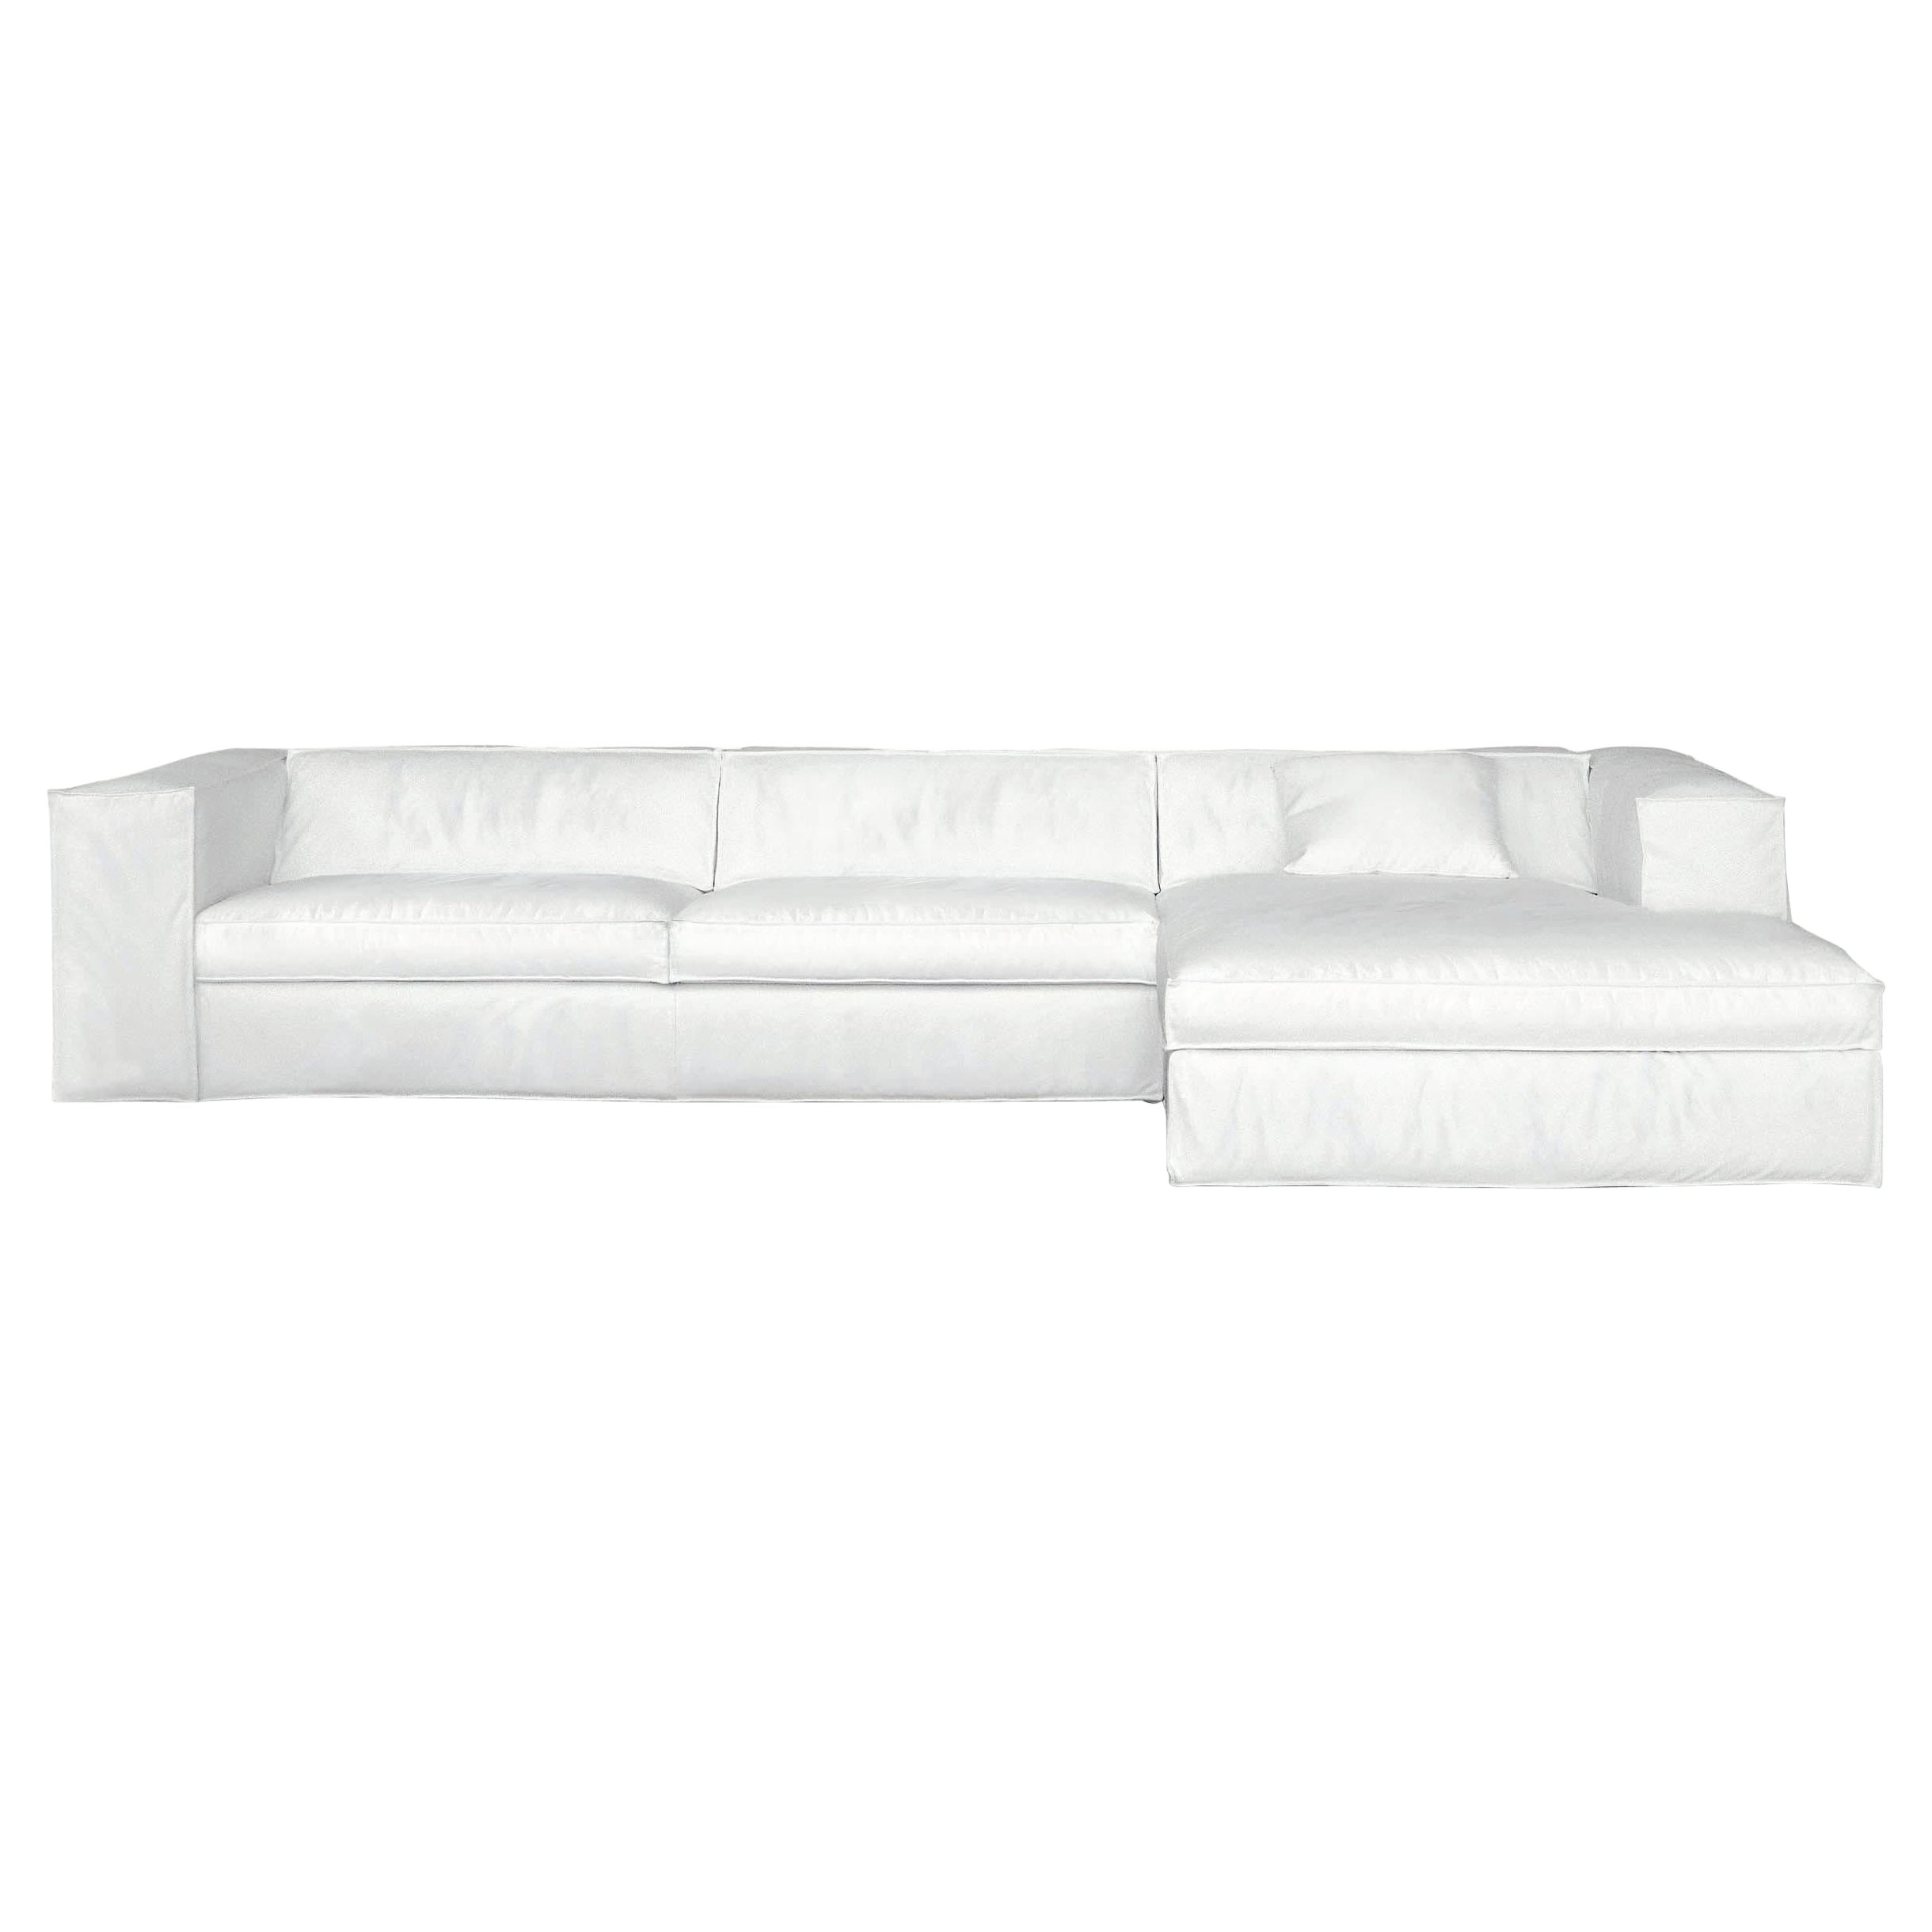 Up Small Modular Sofa in Kami White Upholstery by Giuseppe Viganò For Sale